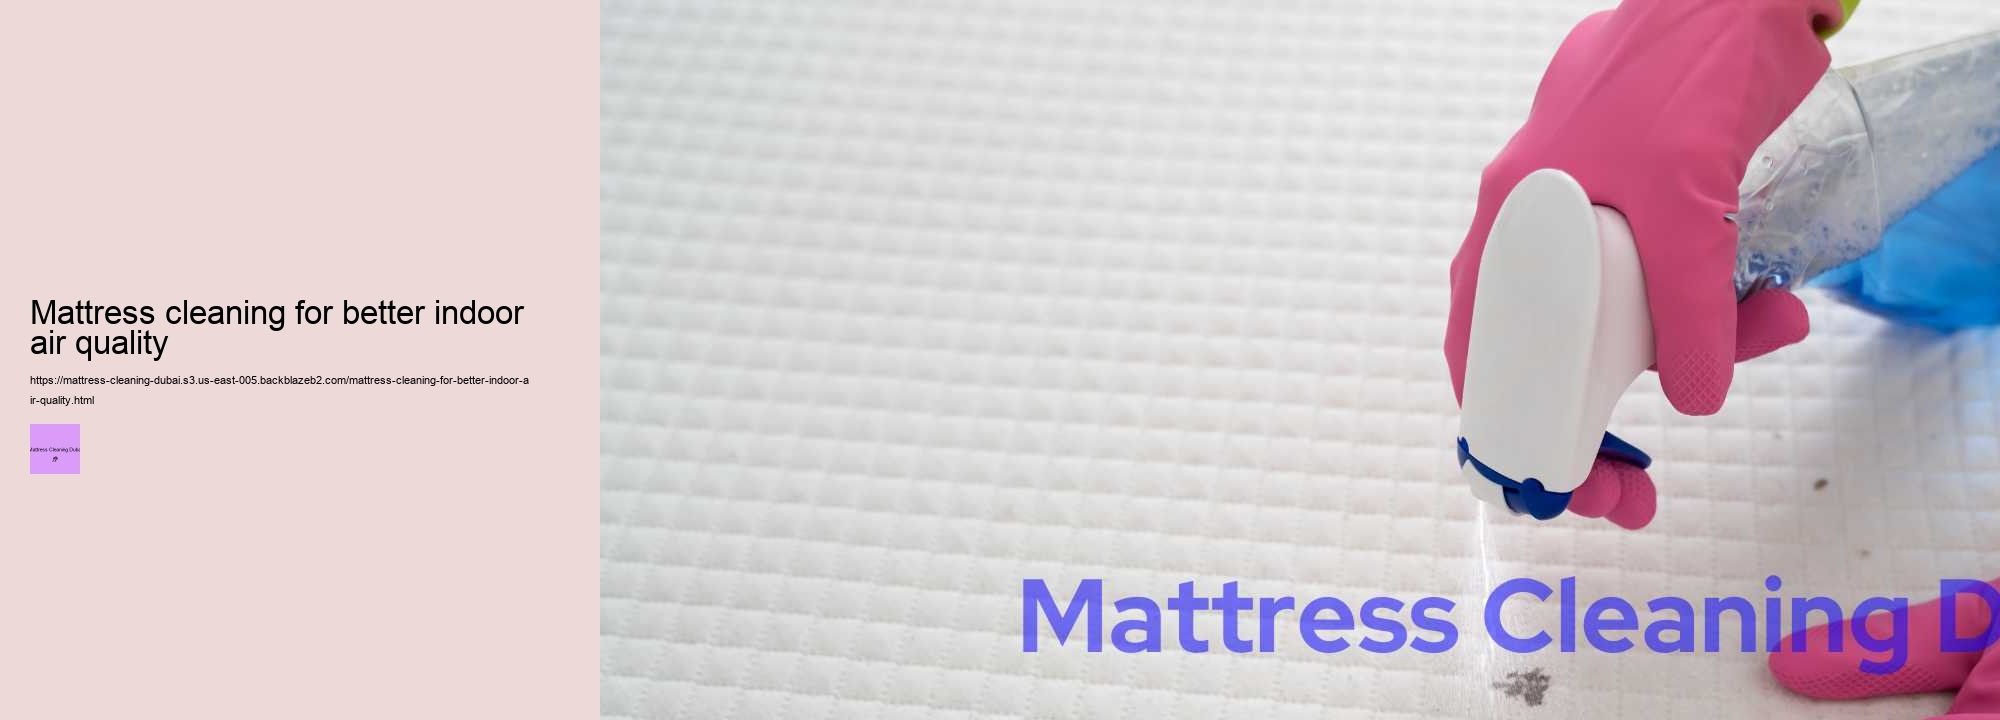 Mattress cleaning for better indoor air quality